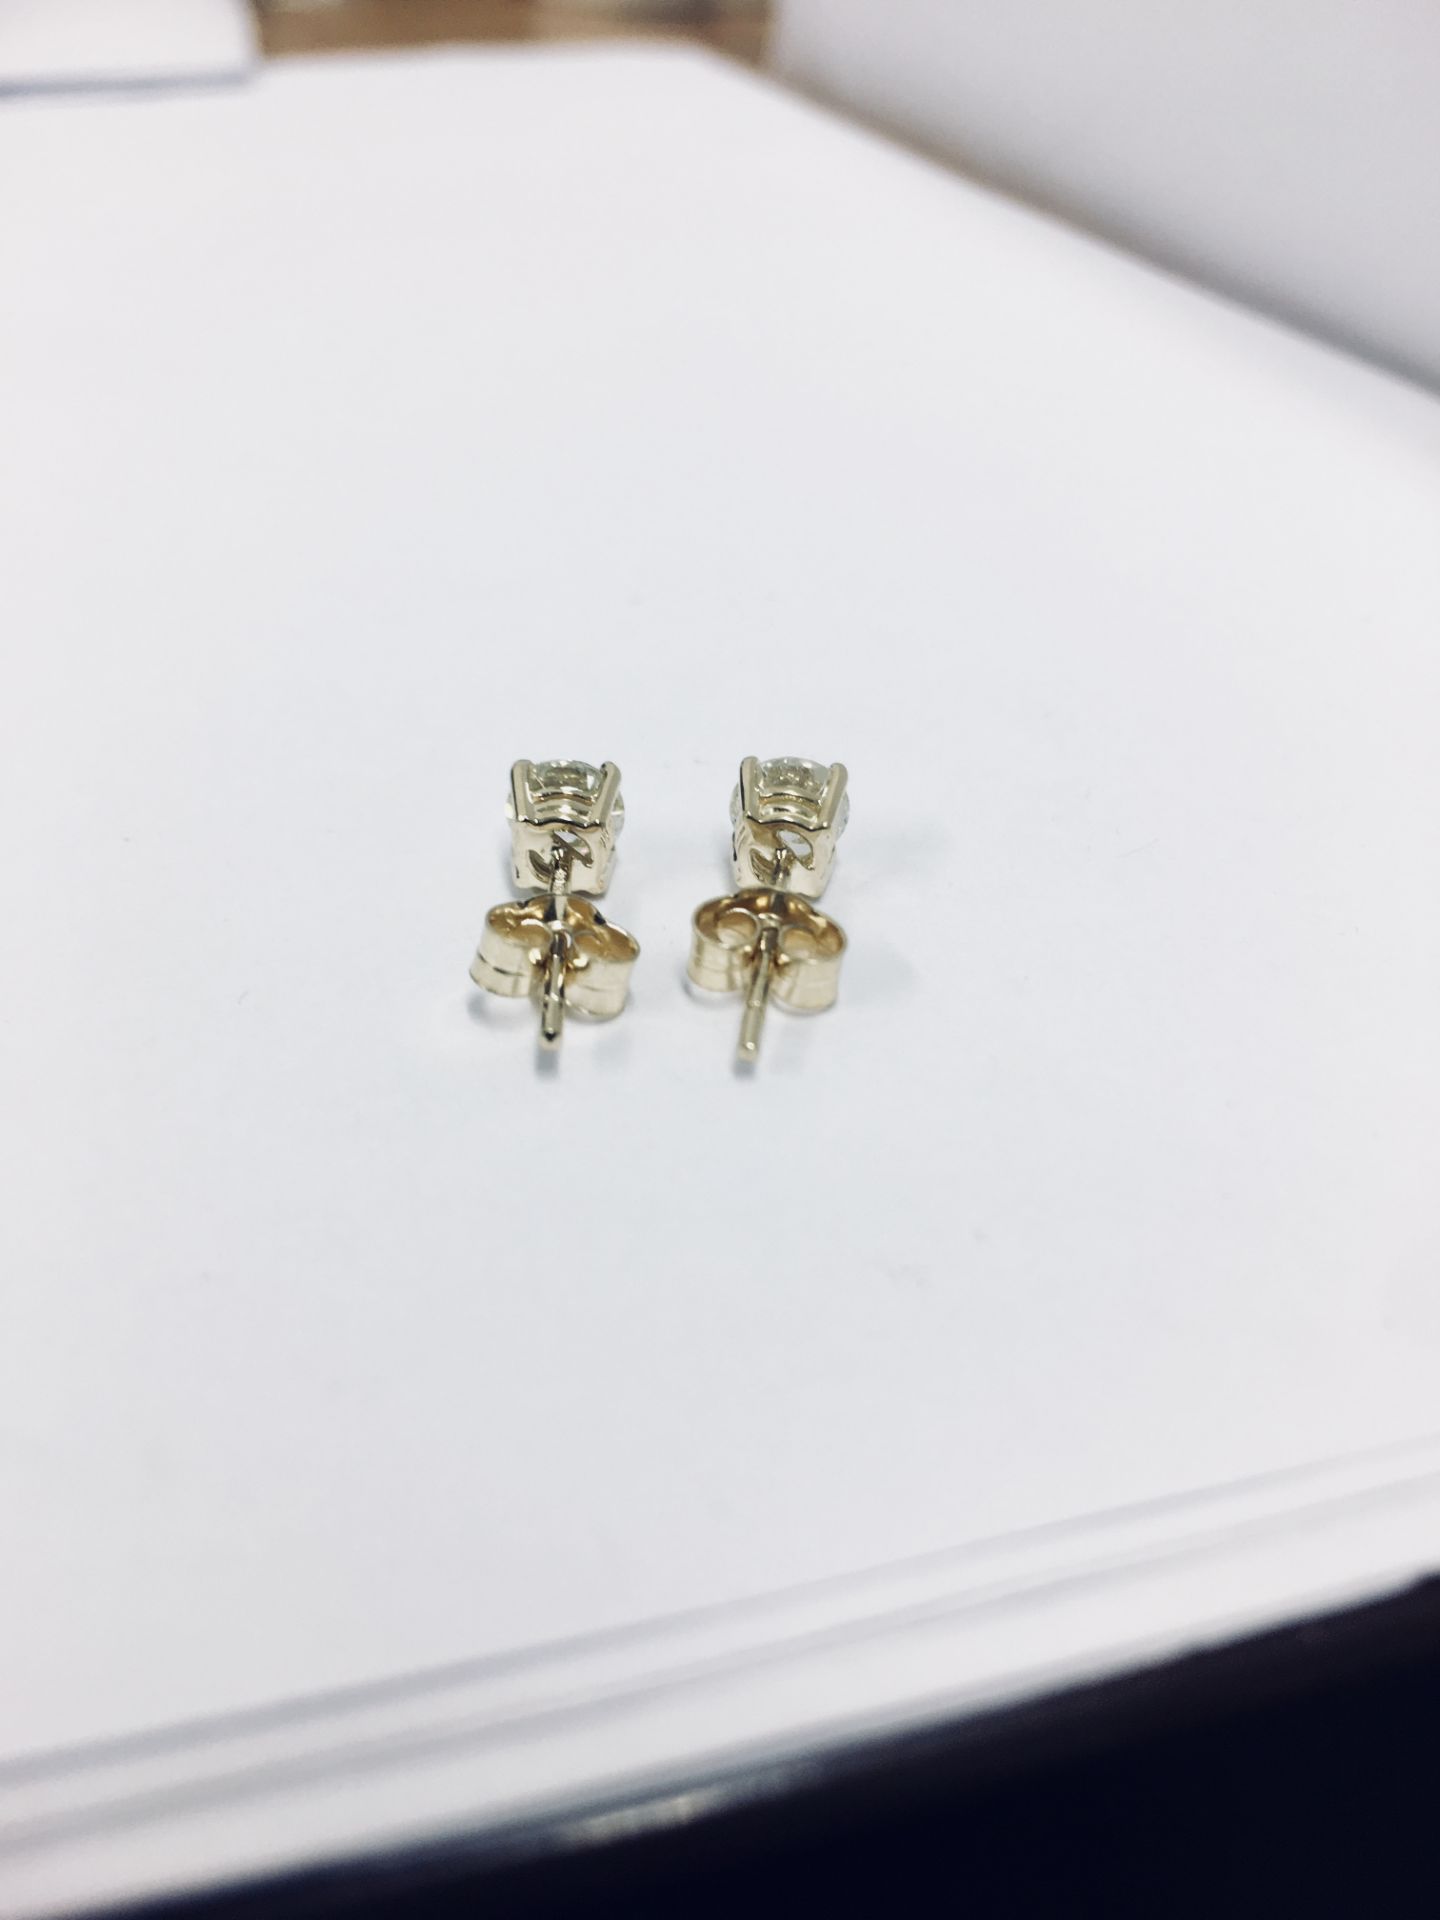 1.00Ct Diamond Solitaire Earrings Set In 18Ct Yellow Gold. - Image 11 of 19